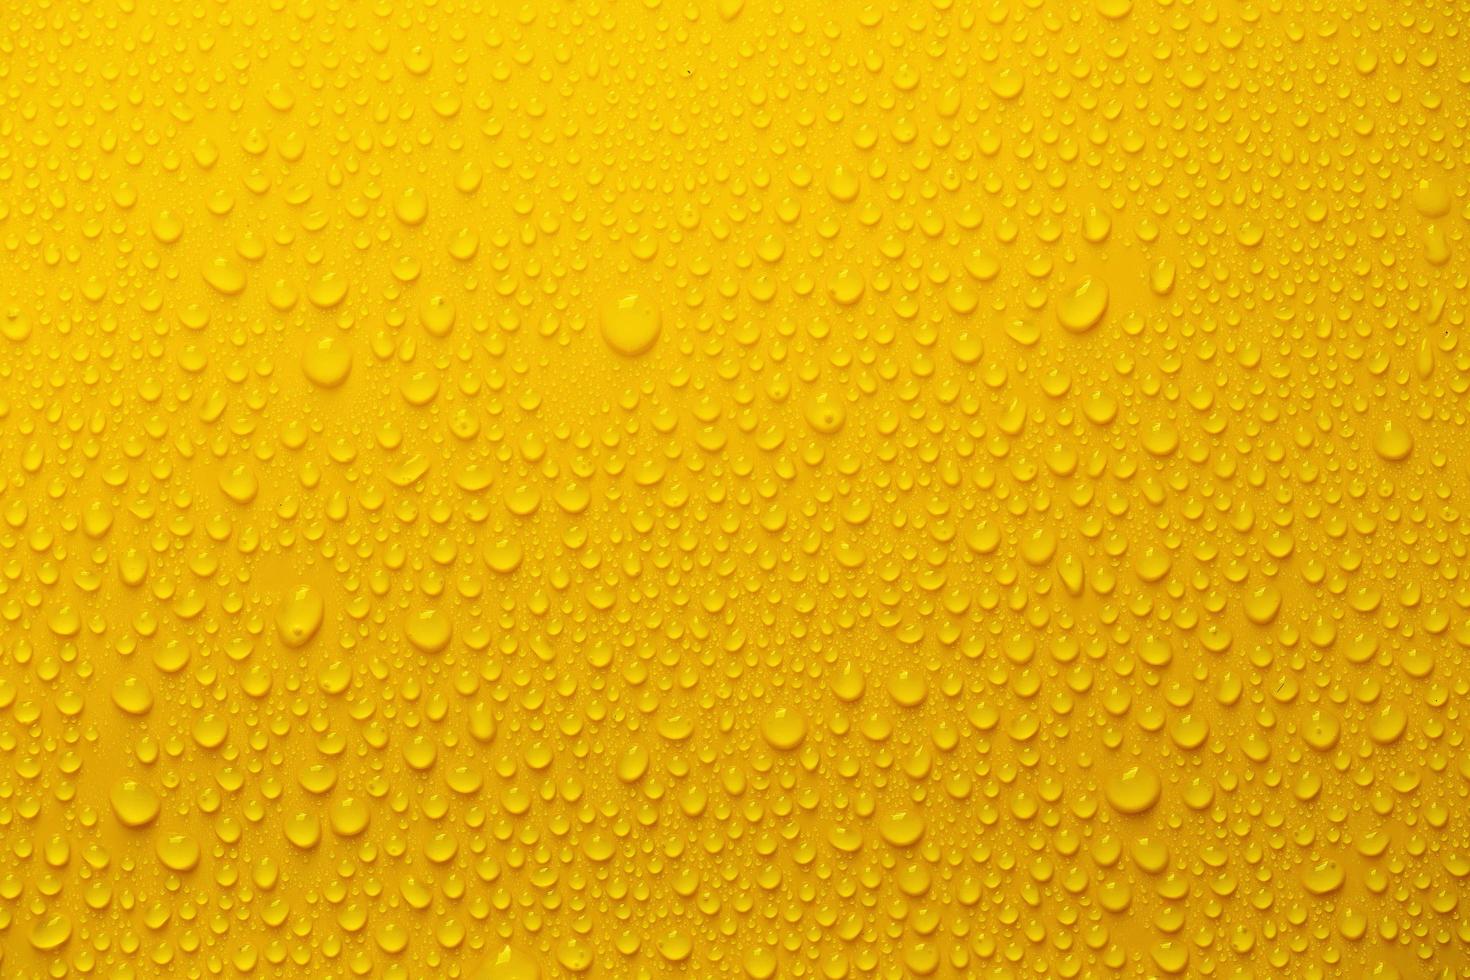 Rain or Water drops on yellow background photo